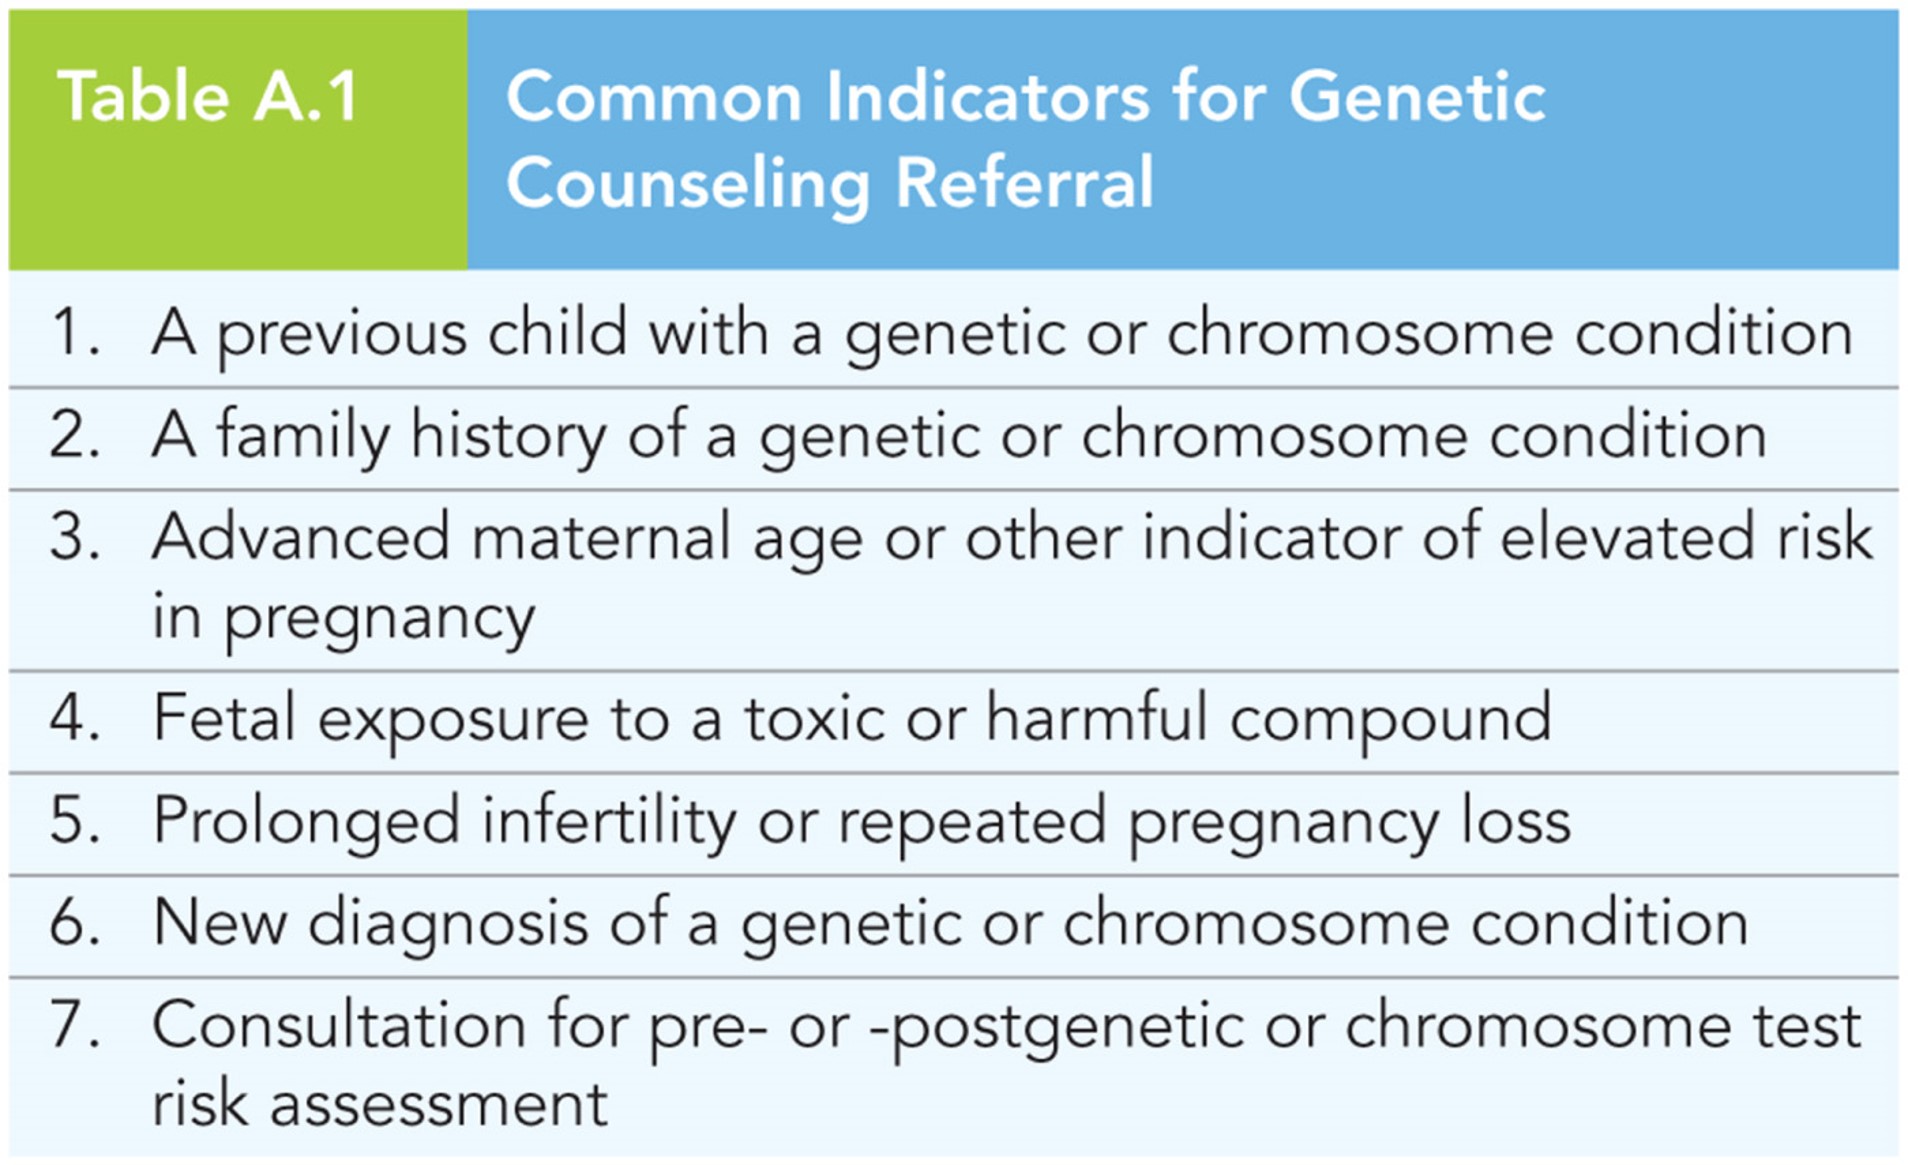 Common Indicators for Genetic Counseling Referral